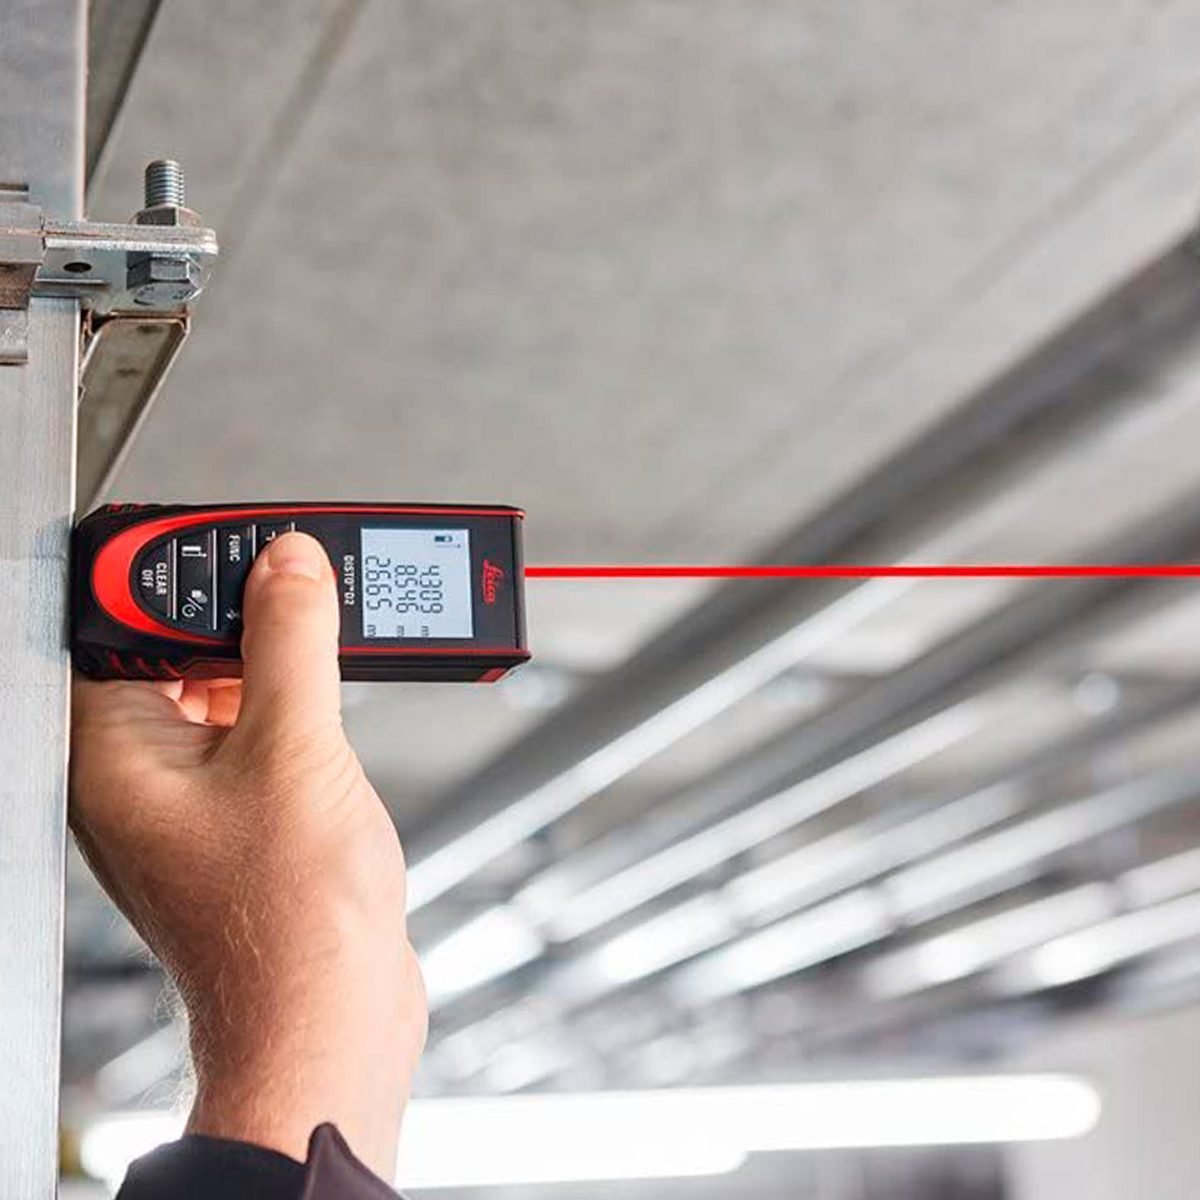 https://www.familyhandyman.com/wp-content/uploads/2022/06/Leica-DISTO-D2-New-metric_Imperial-Laser-Distance-Measure-with-Bluetooth_ecomm-amazon.com_.jpg